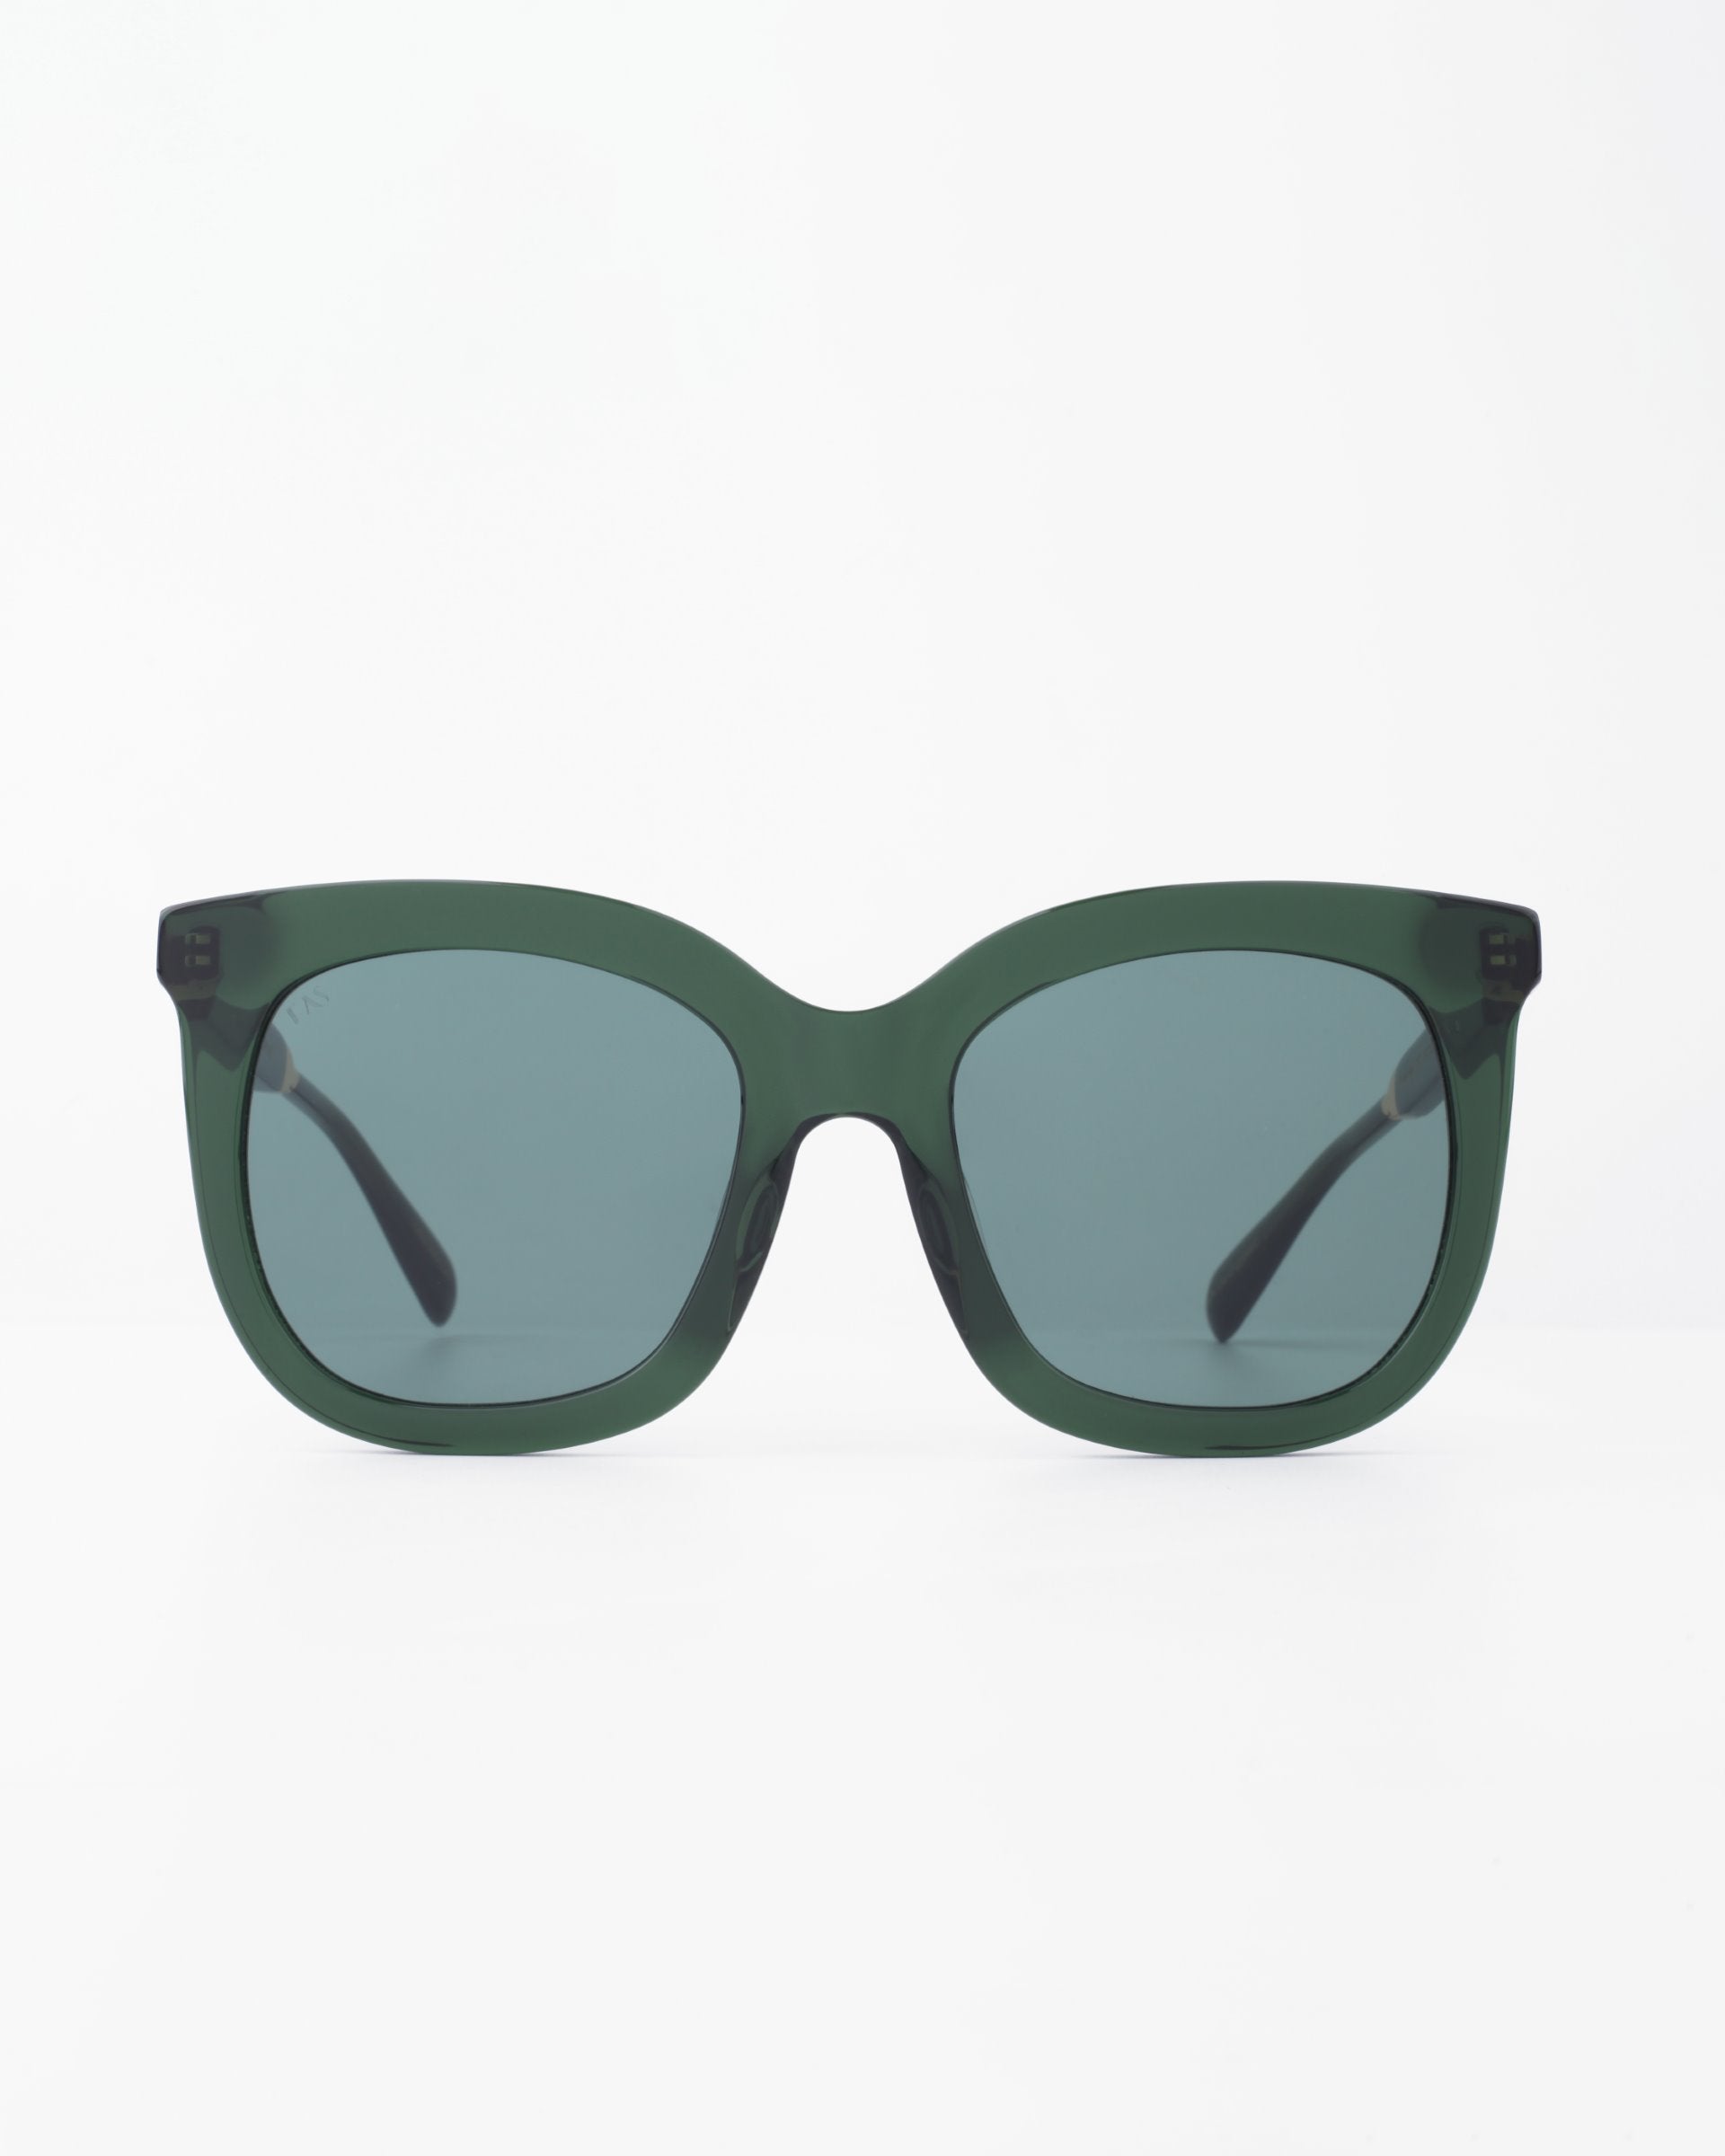 A pair of dark green, rectangular Riverside sunglasses by For Art's Sake® with slightly curved edges and shatter-resistant dark lenses, displayed against a plain white background. The handmade acetate frame features black temples that are slightly visible from this frontal view.